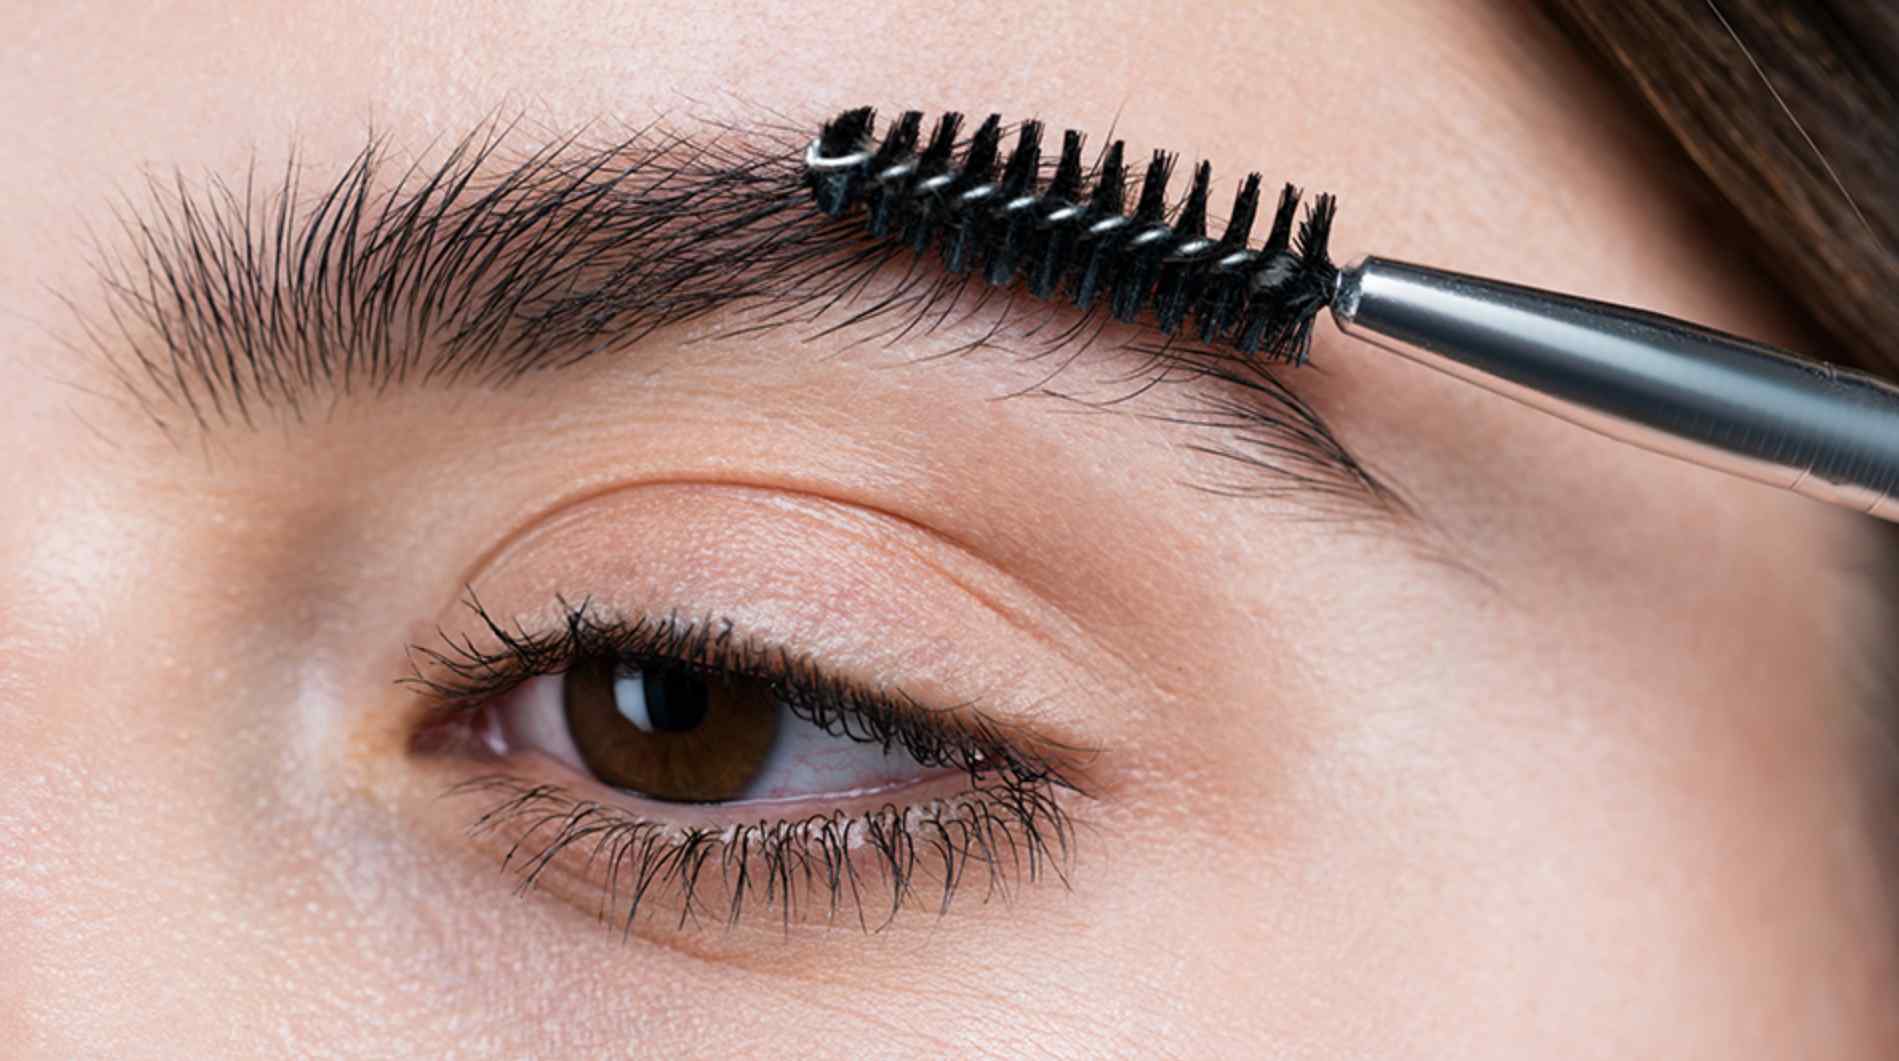 The oil is favored for eyebrow growth due to its nutrient-rich composition.